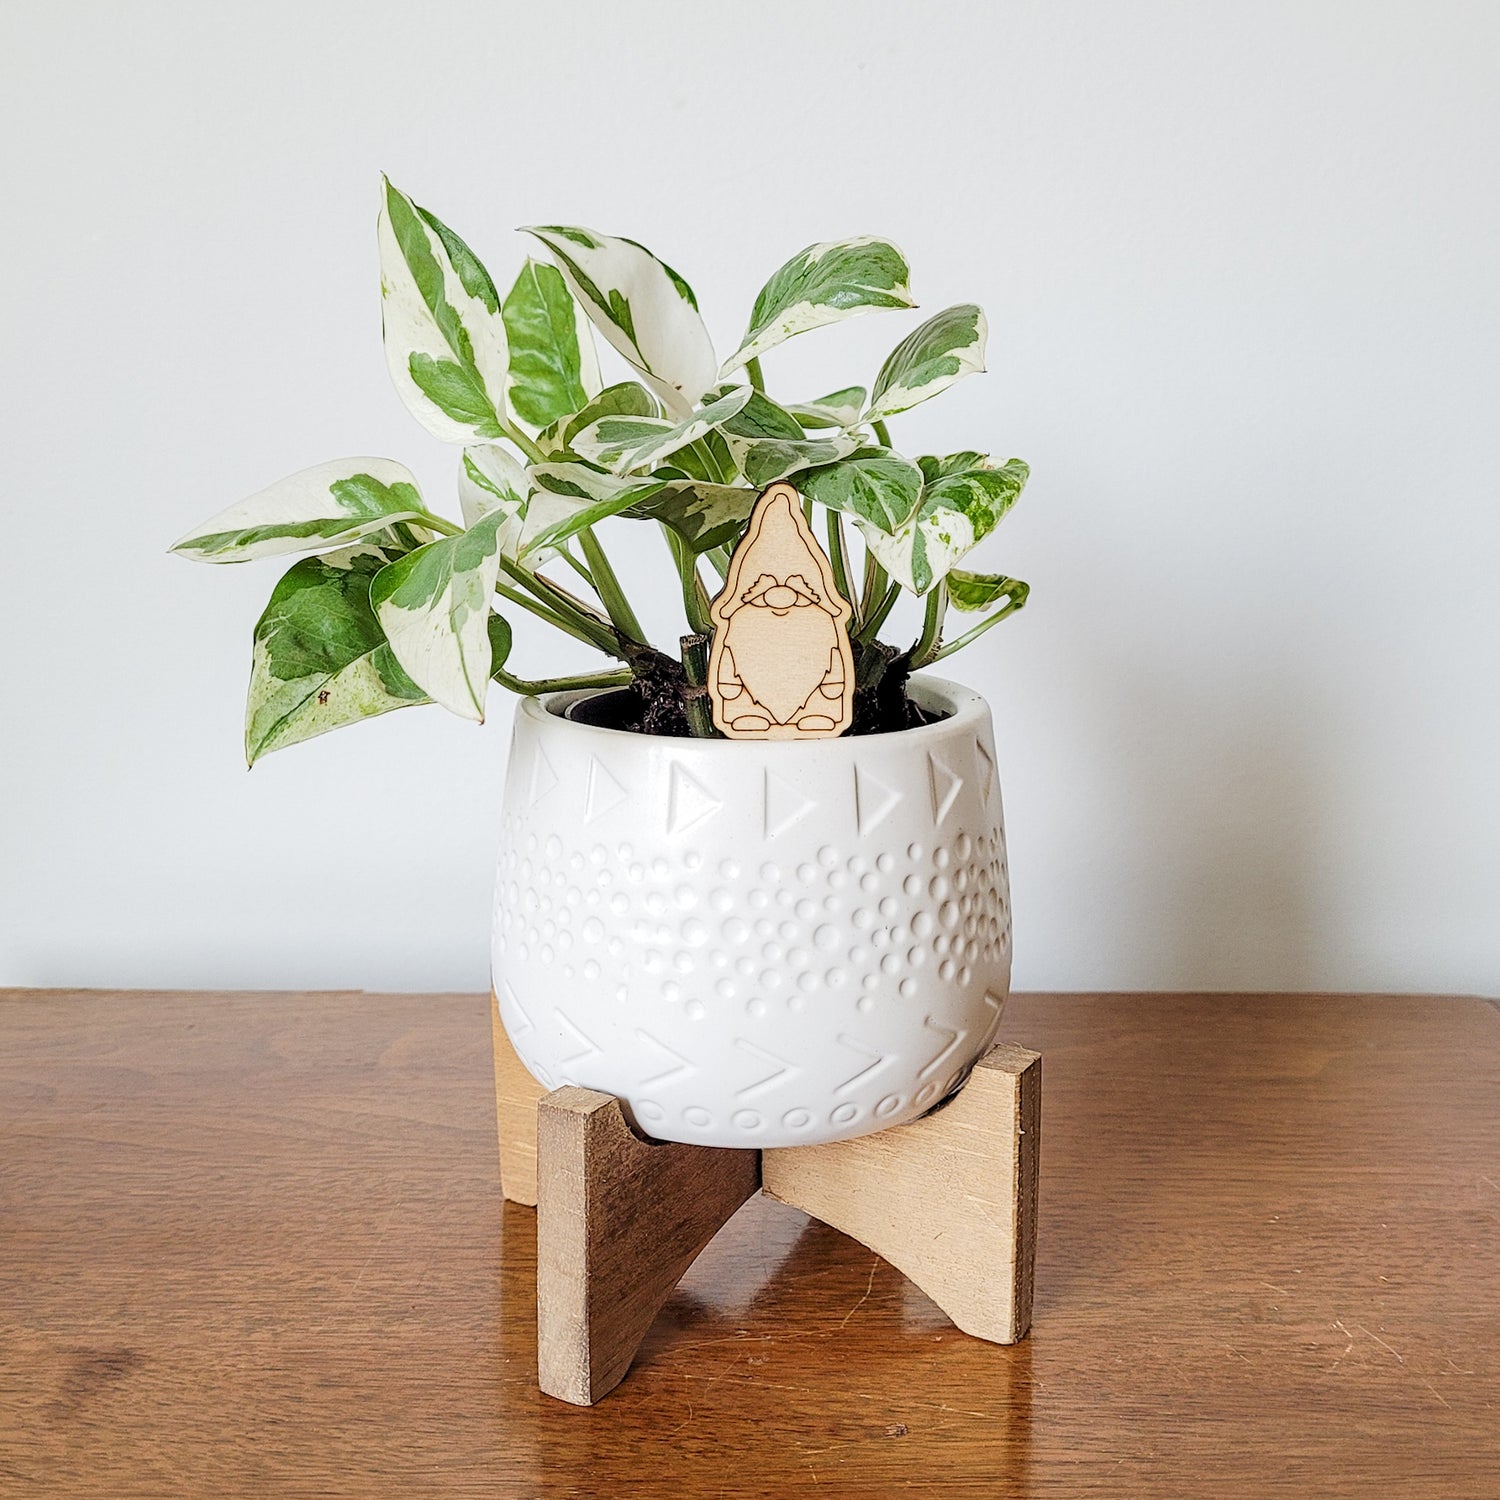 Single mini gnome decorative plant stake displayed in a white 3 inch pot with a pothos plant.